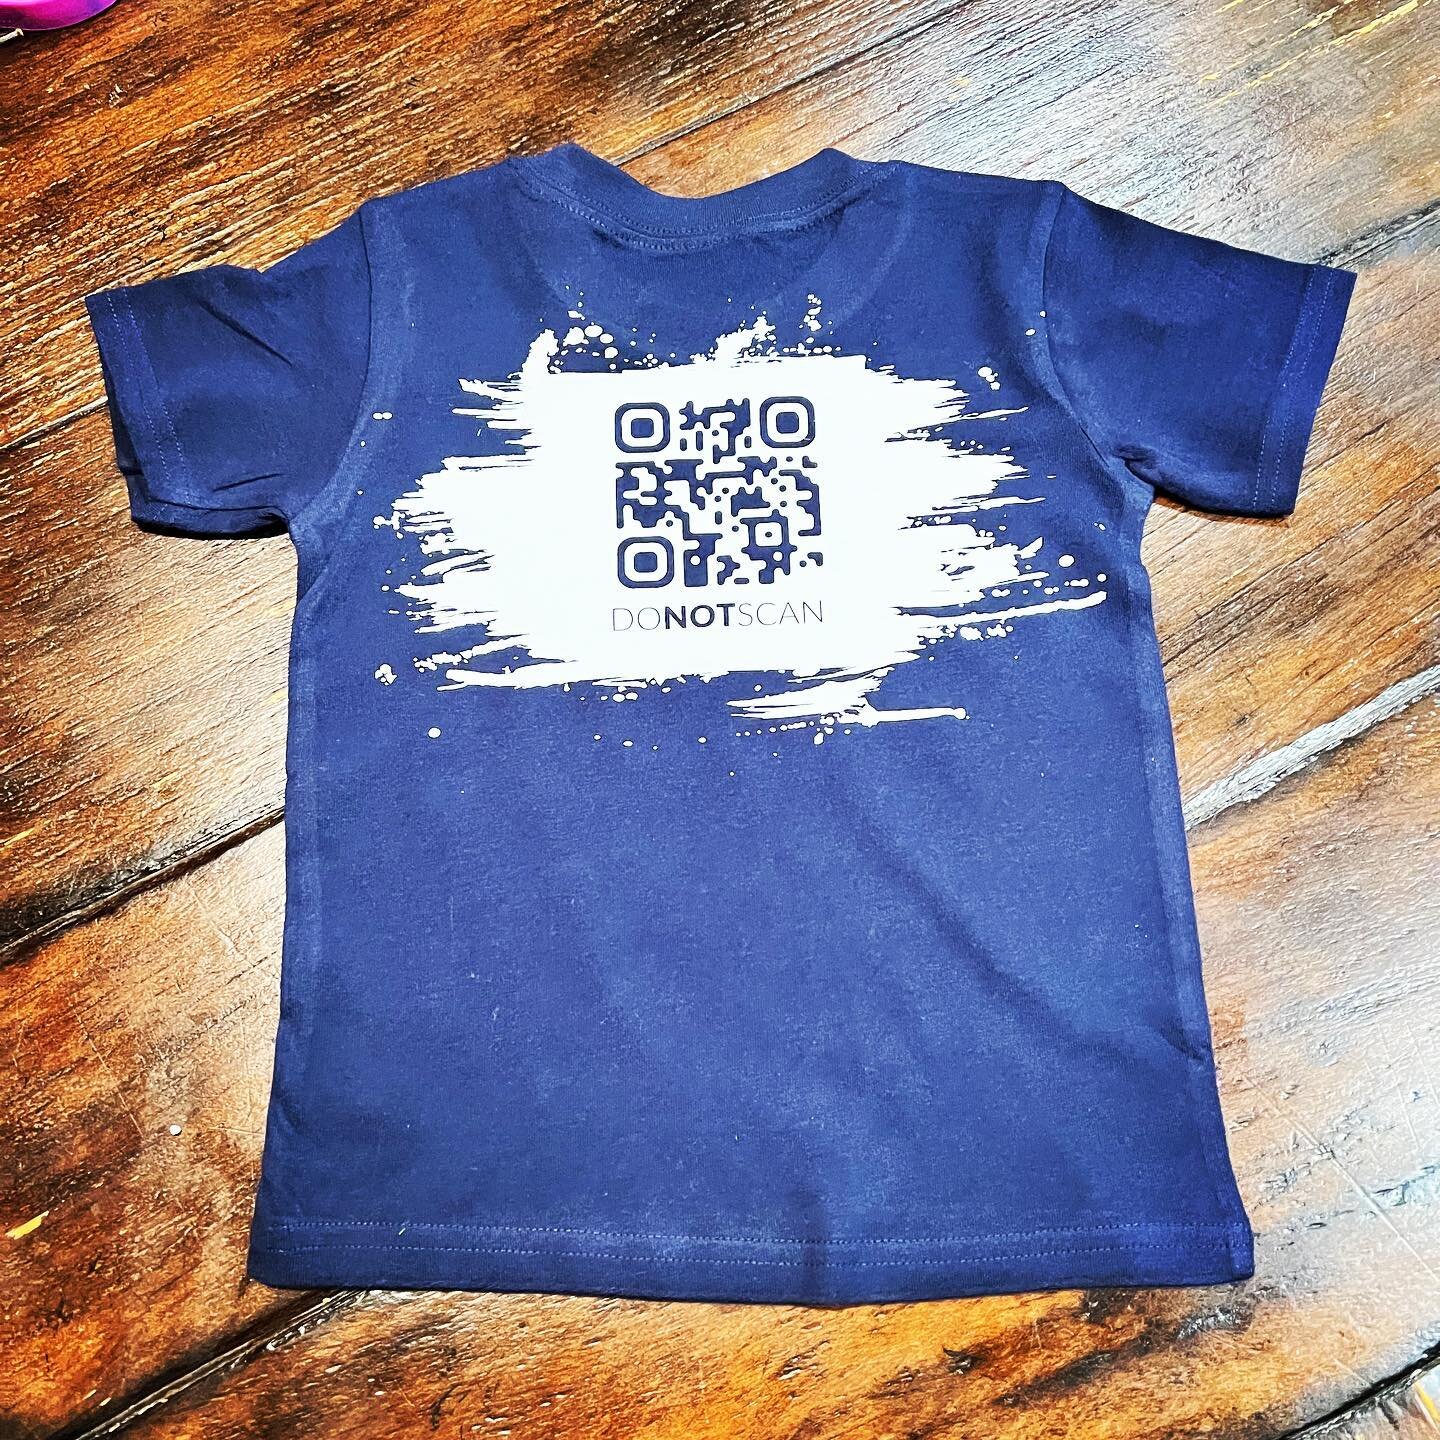 Hired the kid to test out some new marketing ideas.  Think it&rsquo;ll work?  #marketing #mortgages #realestate #realestatemarketing #mortgagemarketing #qrcode